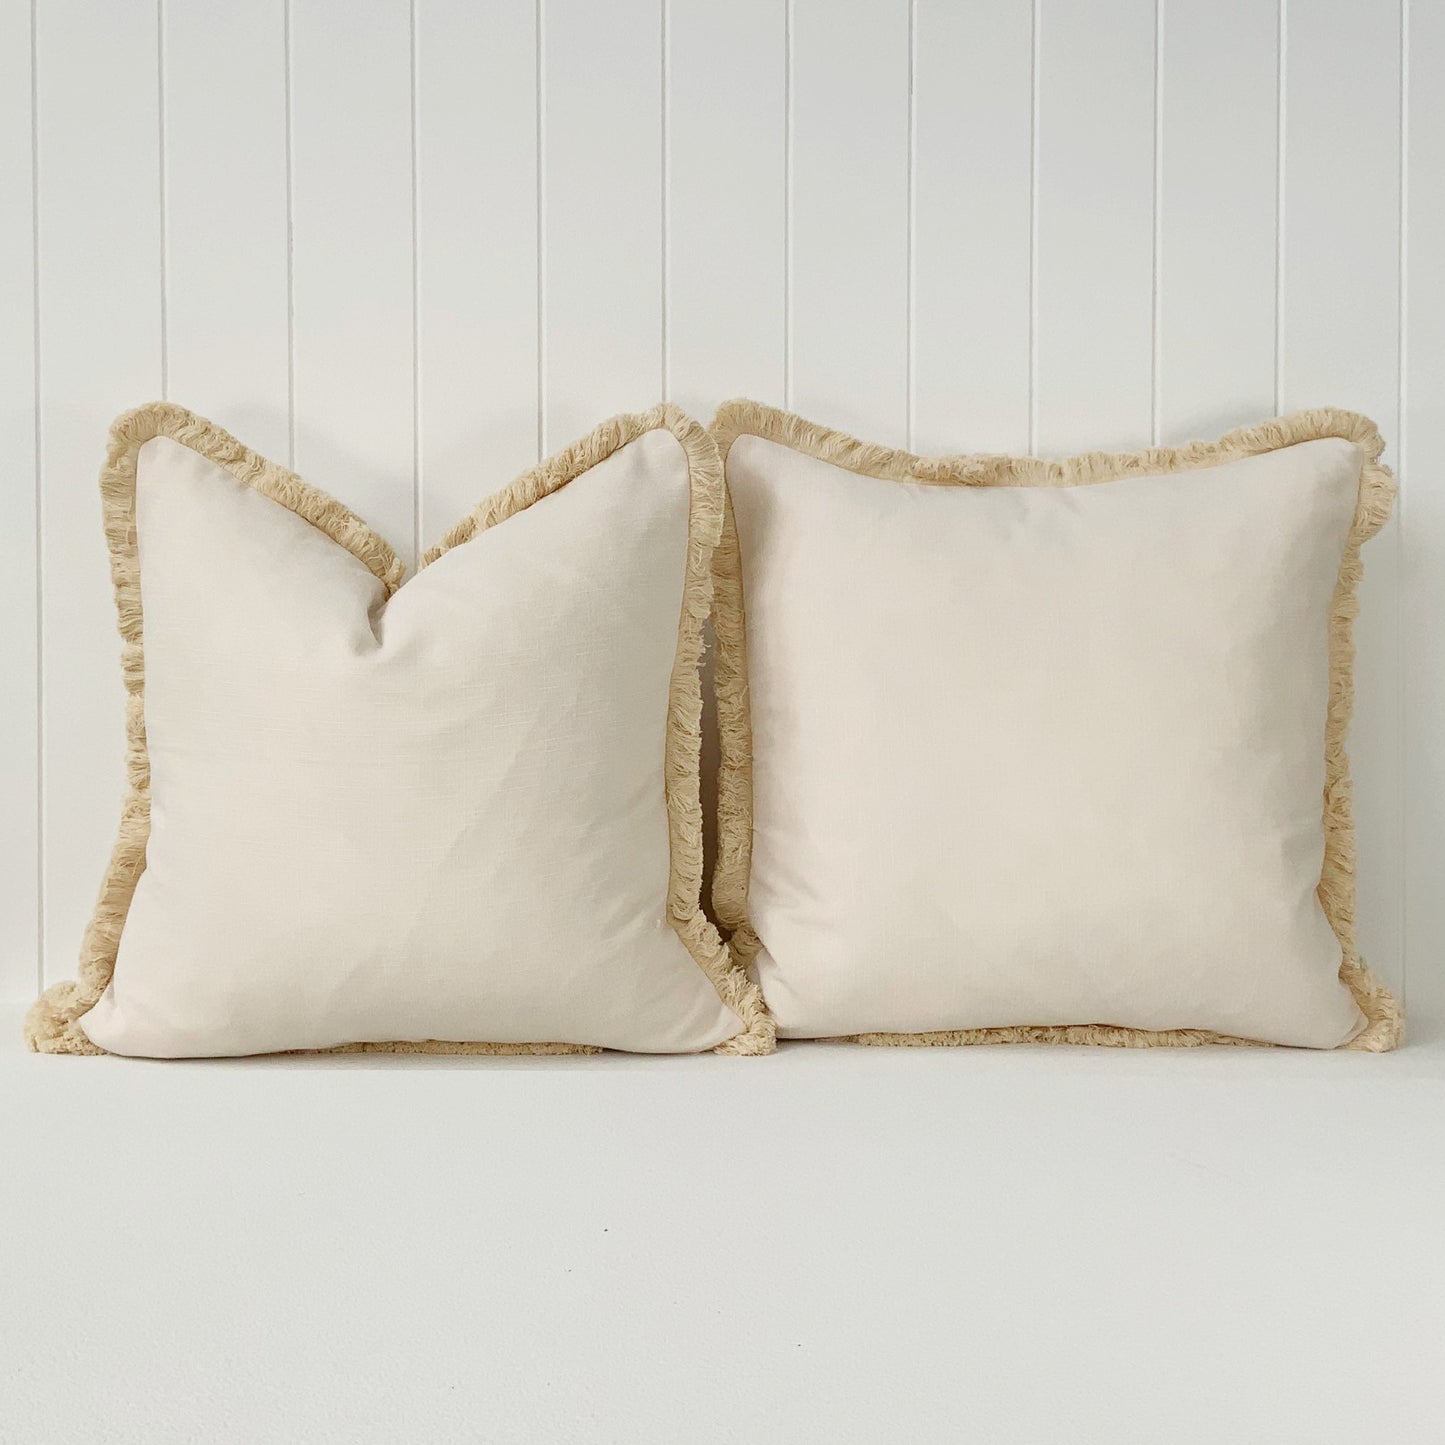 BARBADOS FRINGED CUSHION | IVORY | 55CM X 55CM | CHOOSE FEATHER OR FIBRE FILLING